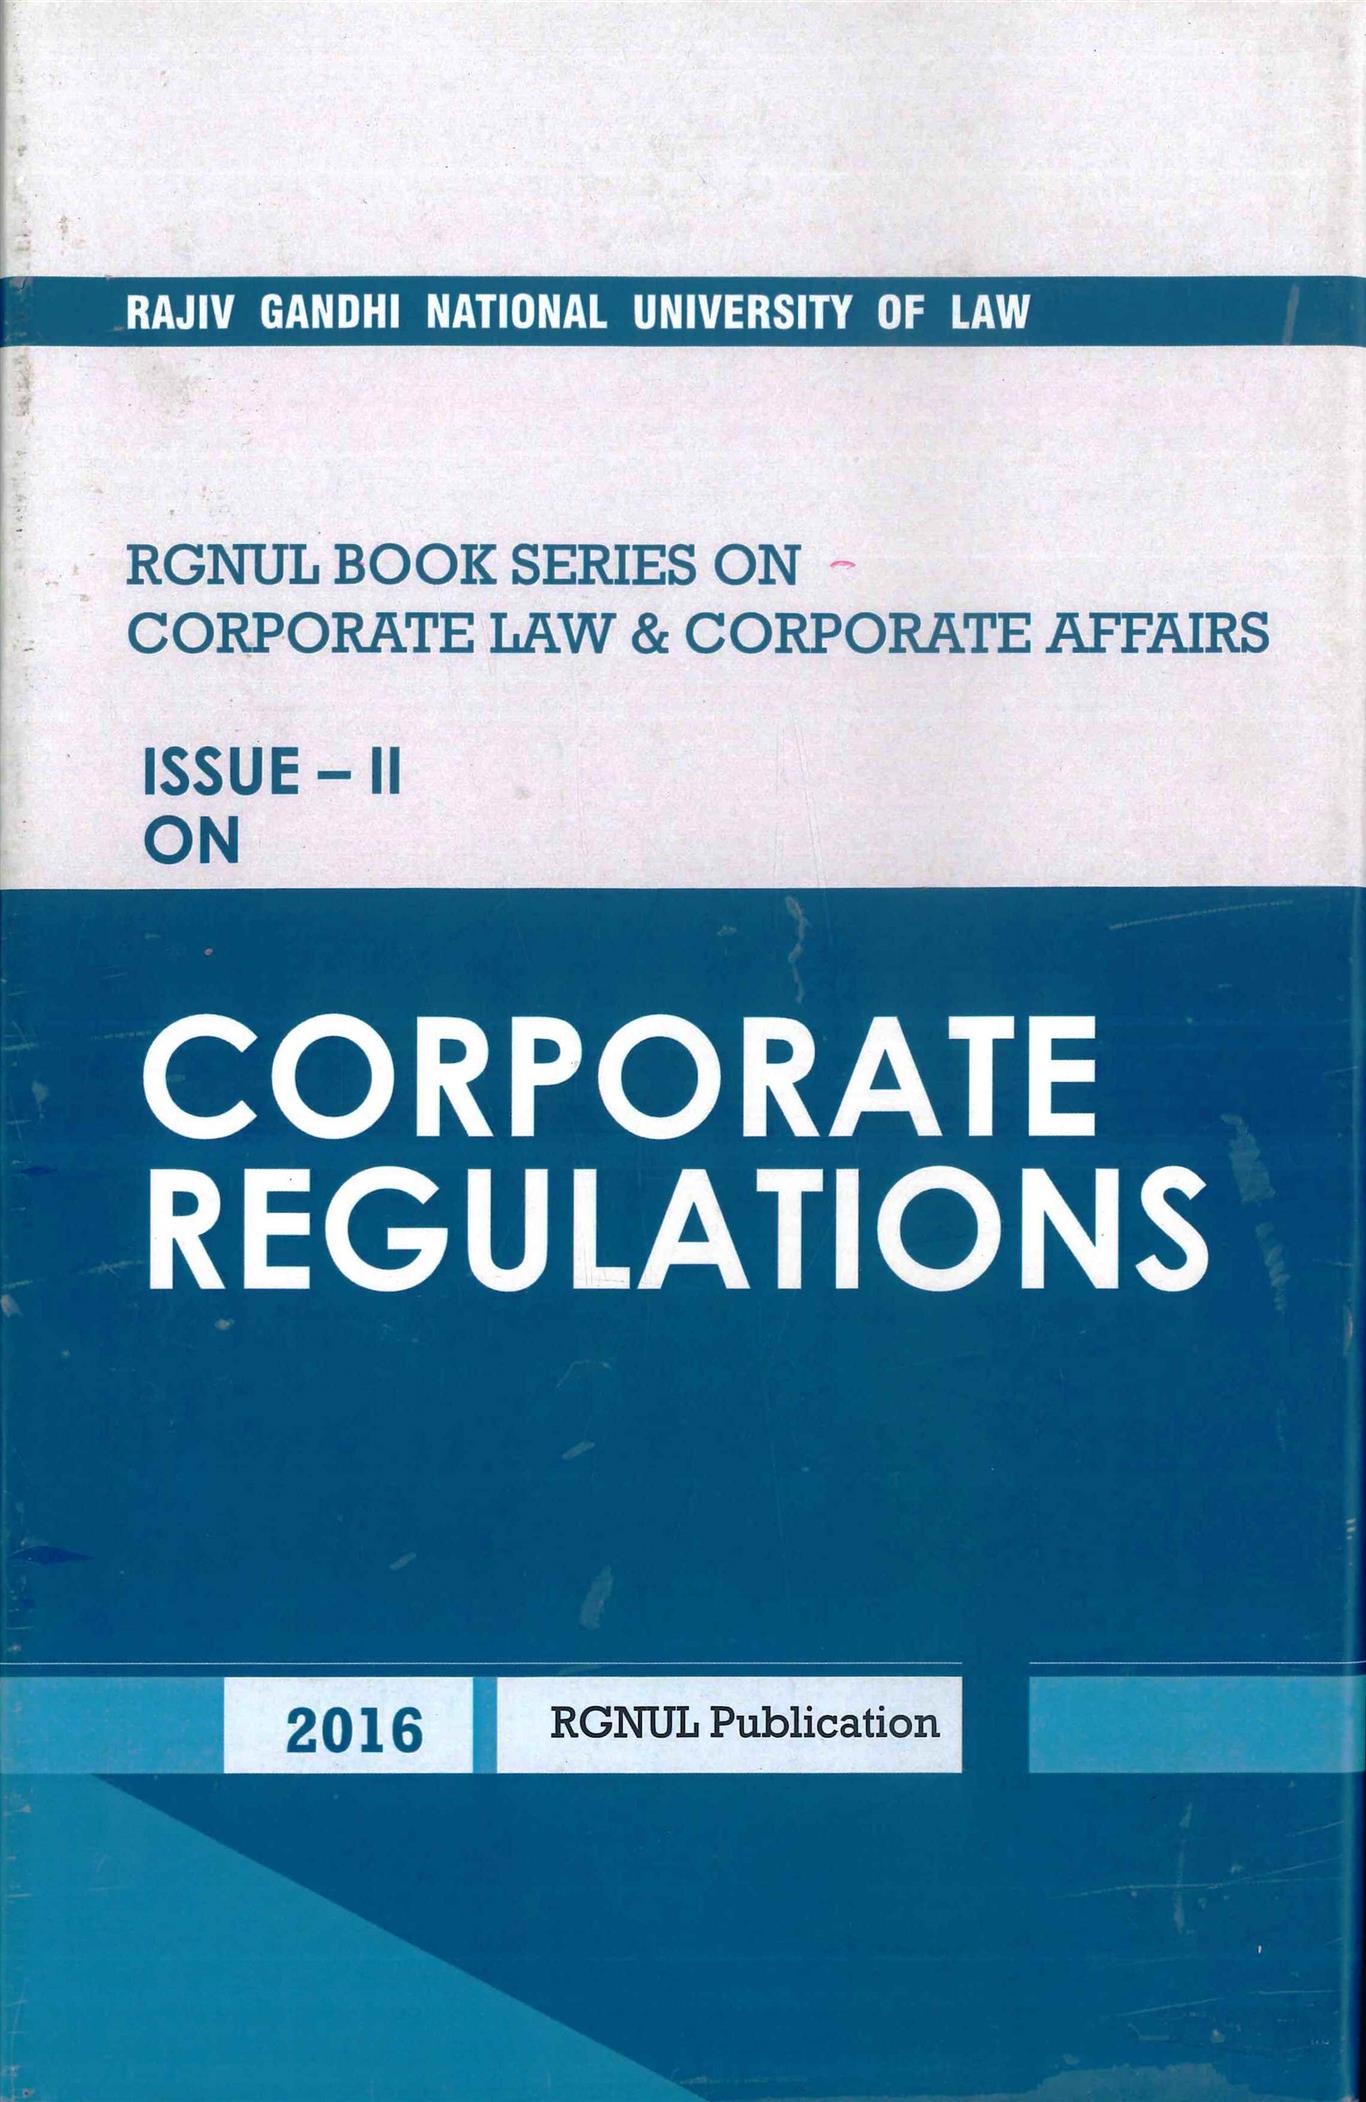 RGNUL Book Series on Corporate Law and Corporate Affairs : Issue – II: “ Corporate Regulations” Author / Edited Book : Prof. (Dr.) Paramjit S. Jaswal, Prof.(Dr.) G.I.S. Sandhu, Dr Vipan Kumar